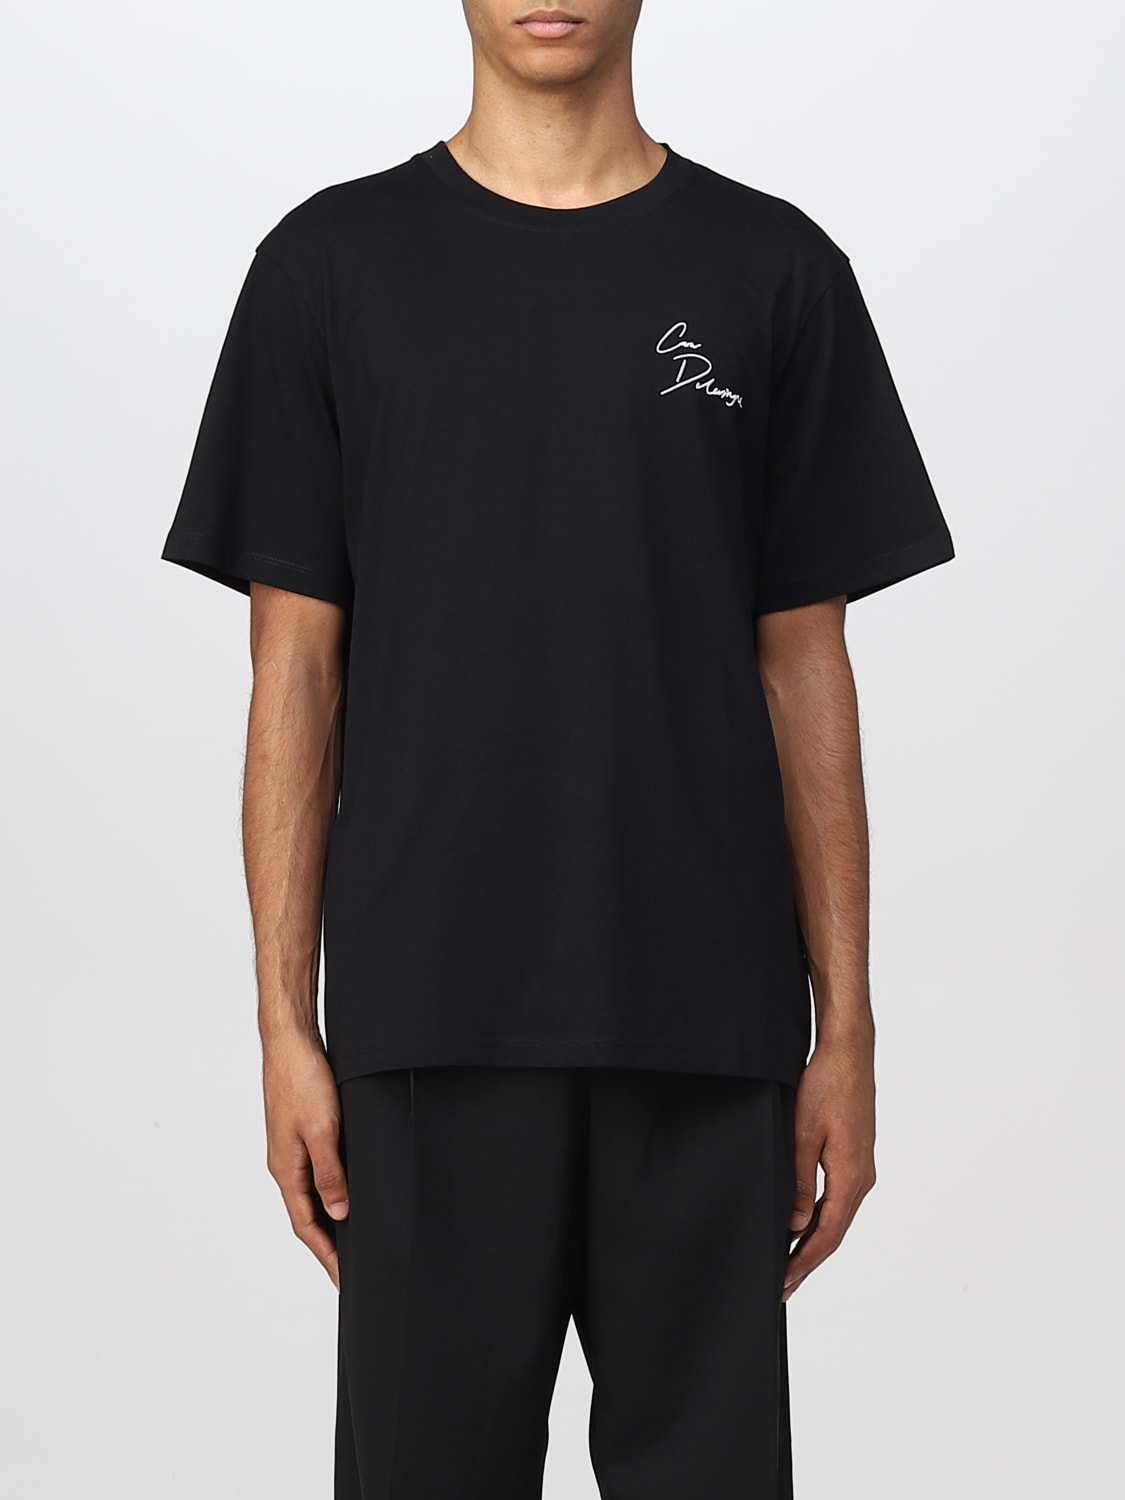 Lagerfeld Outlet: t-shirt for man - Black | Karl Lagerfeld 226W1762 on GIGLIO.COM